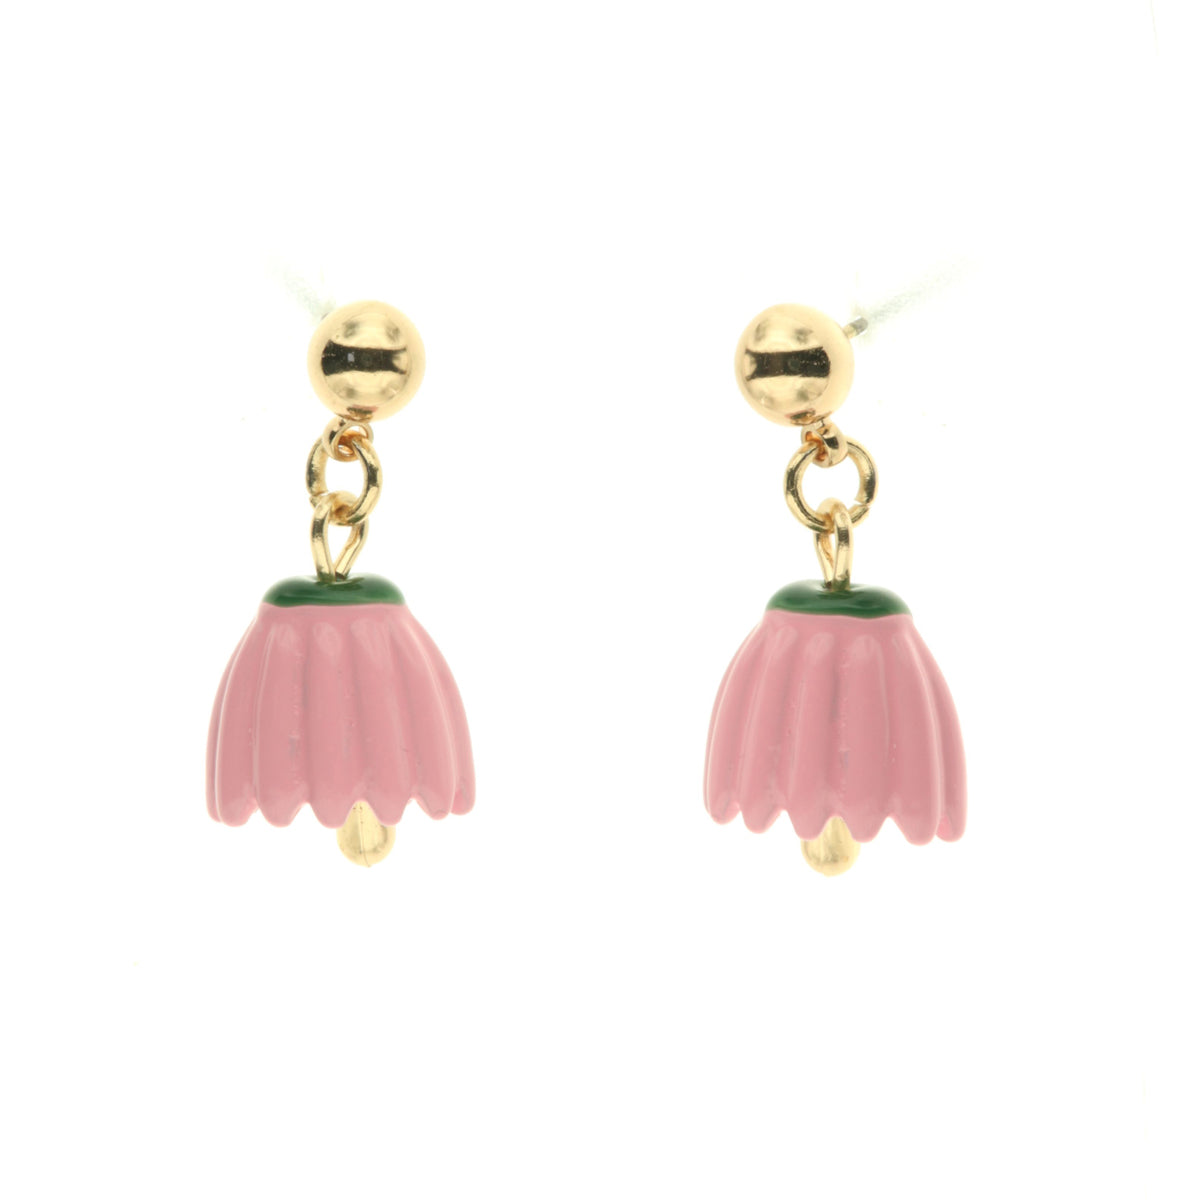 Metal earrings with bell -shaped bell -shaped bells embellished with colored glazes